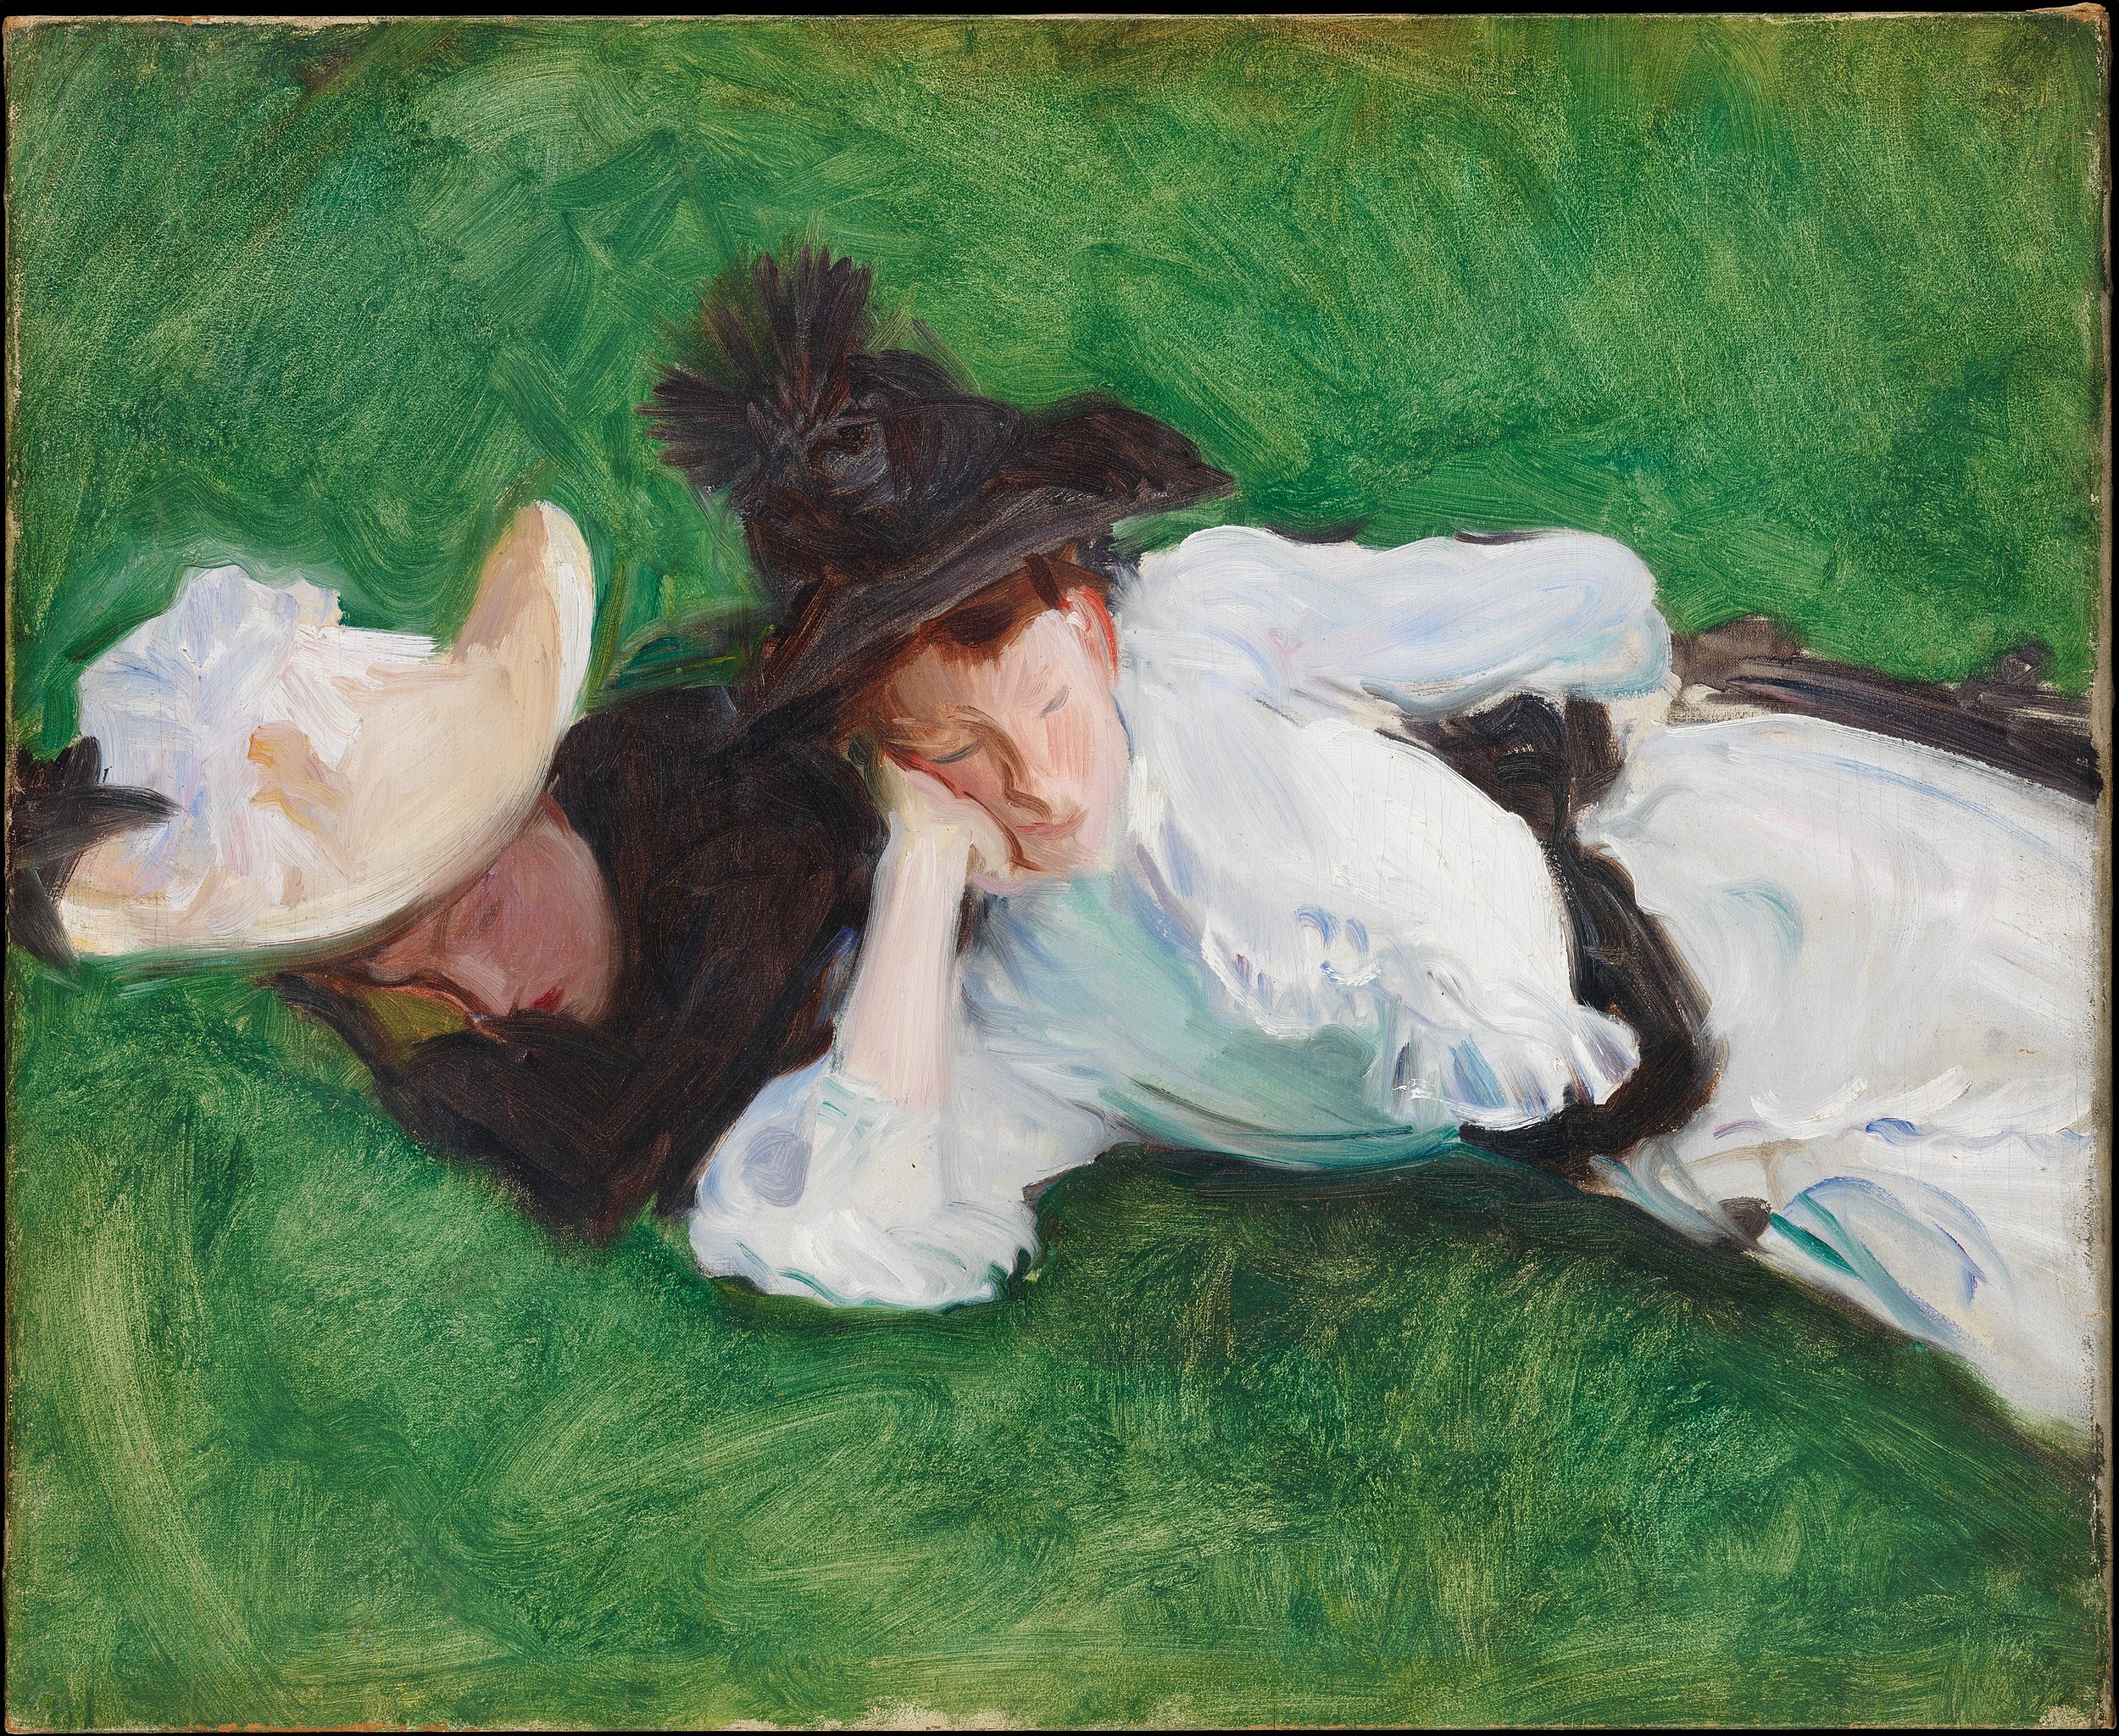 Two Girls on a Lawn by John Singer Sargent - ca. 1889 - 53.7 x 64.1 cm Metropolitan Museum of Art